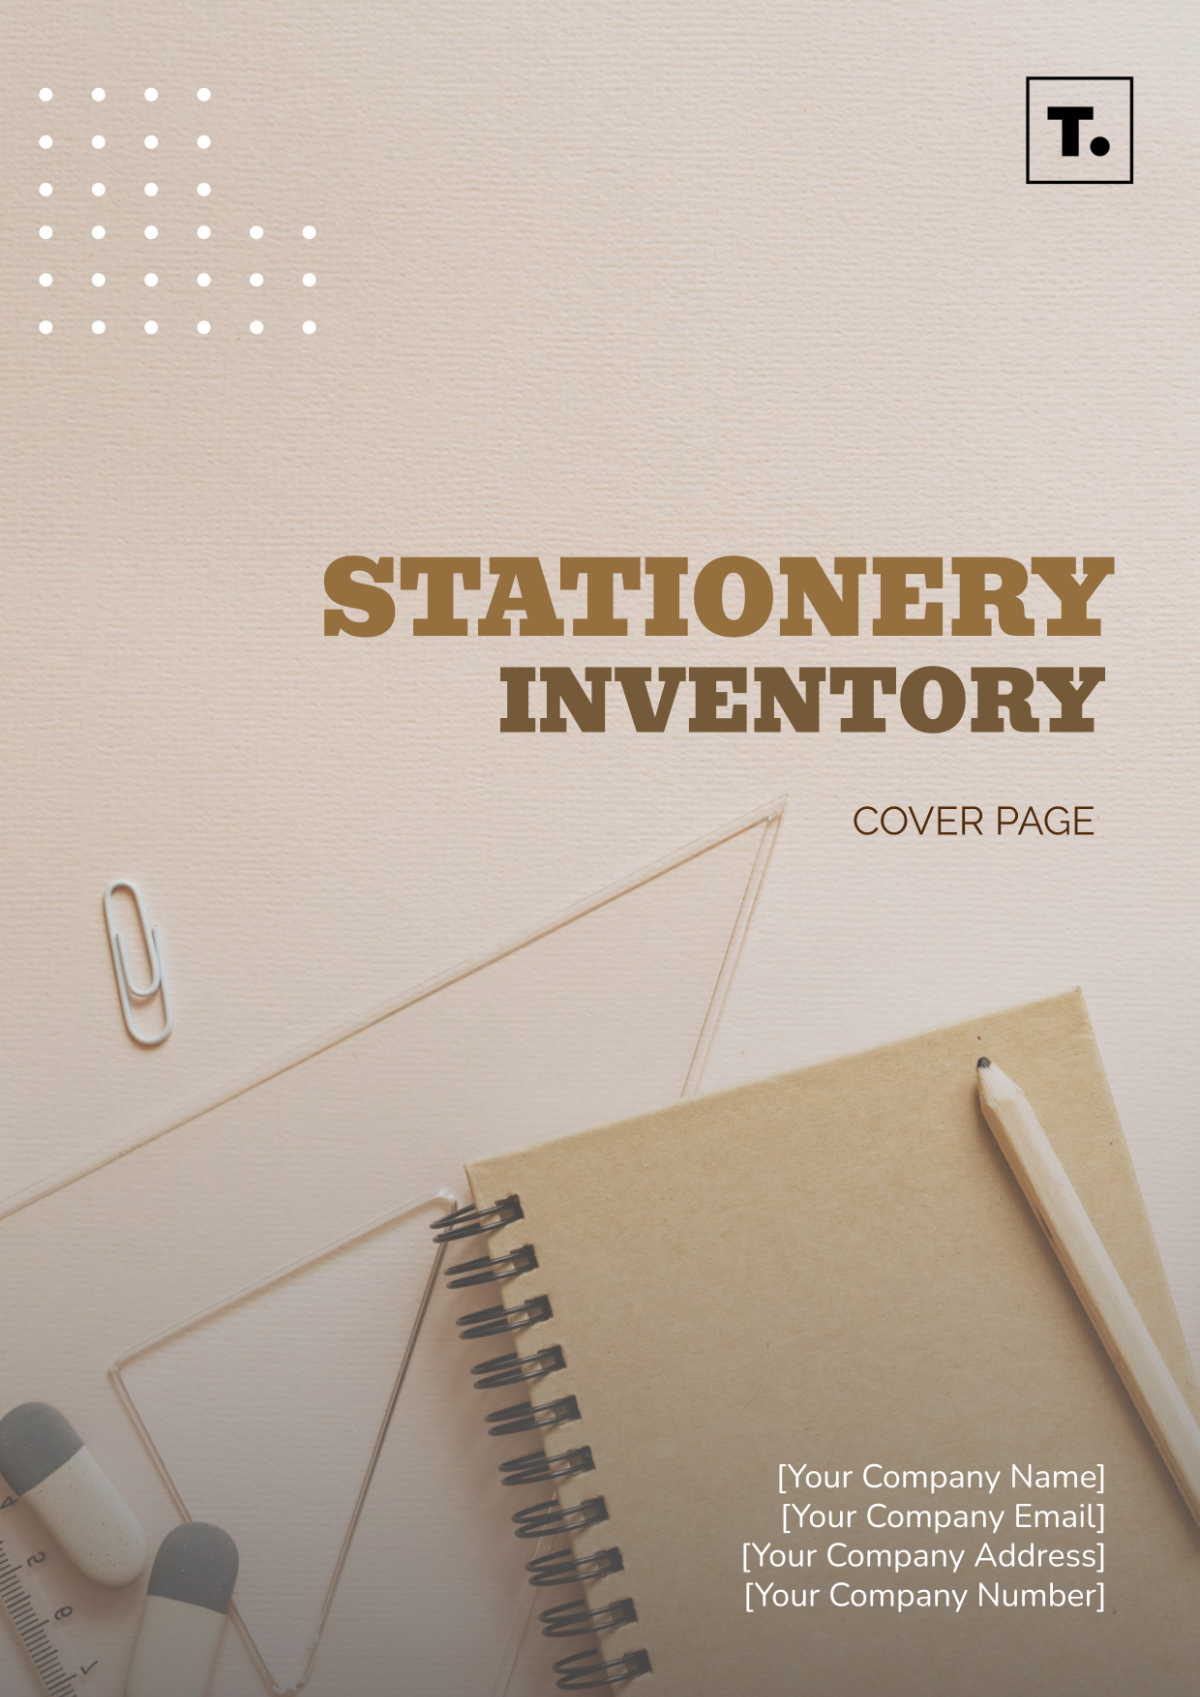 Stationery Inventory Cover Page